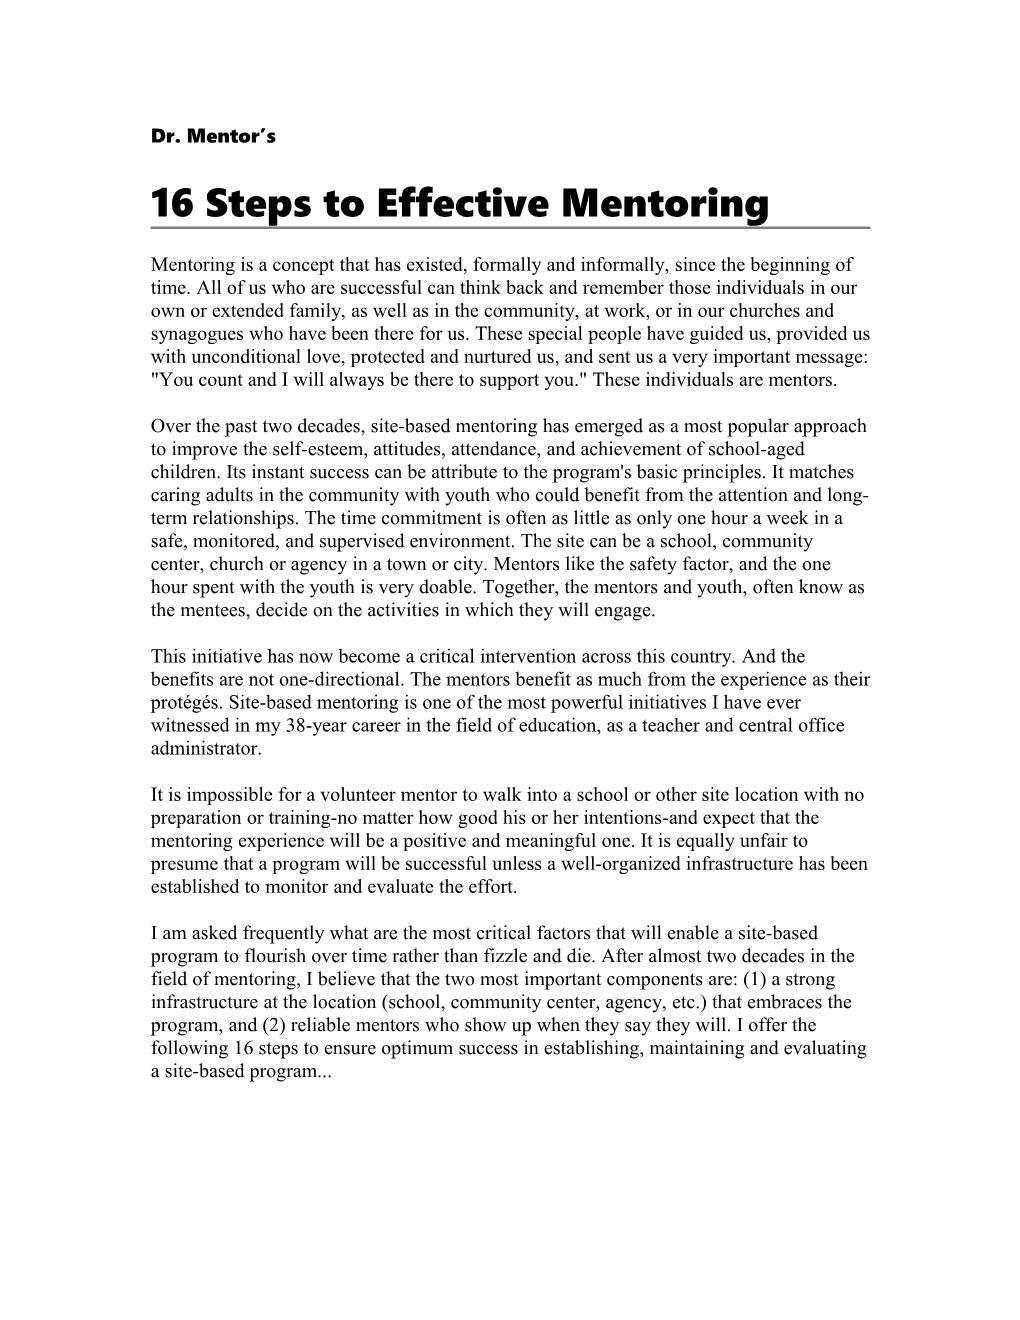 16 Steps to Effective Mentoring